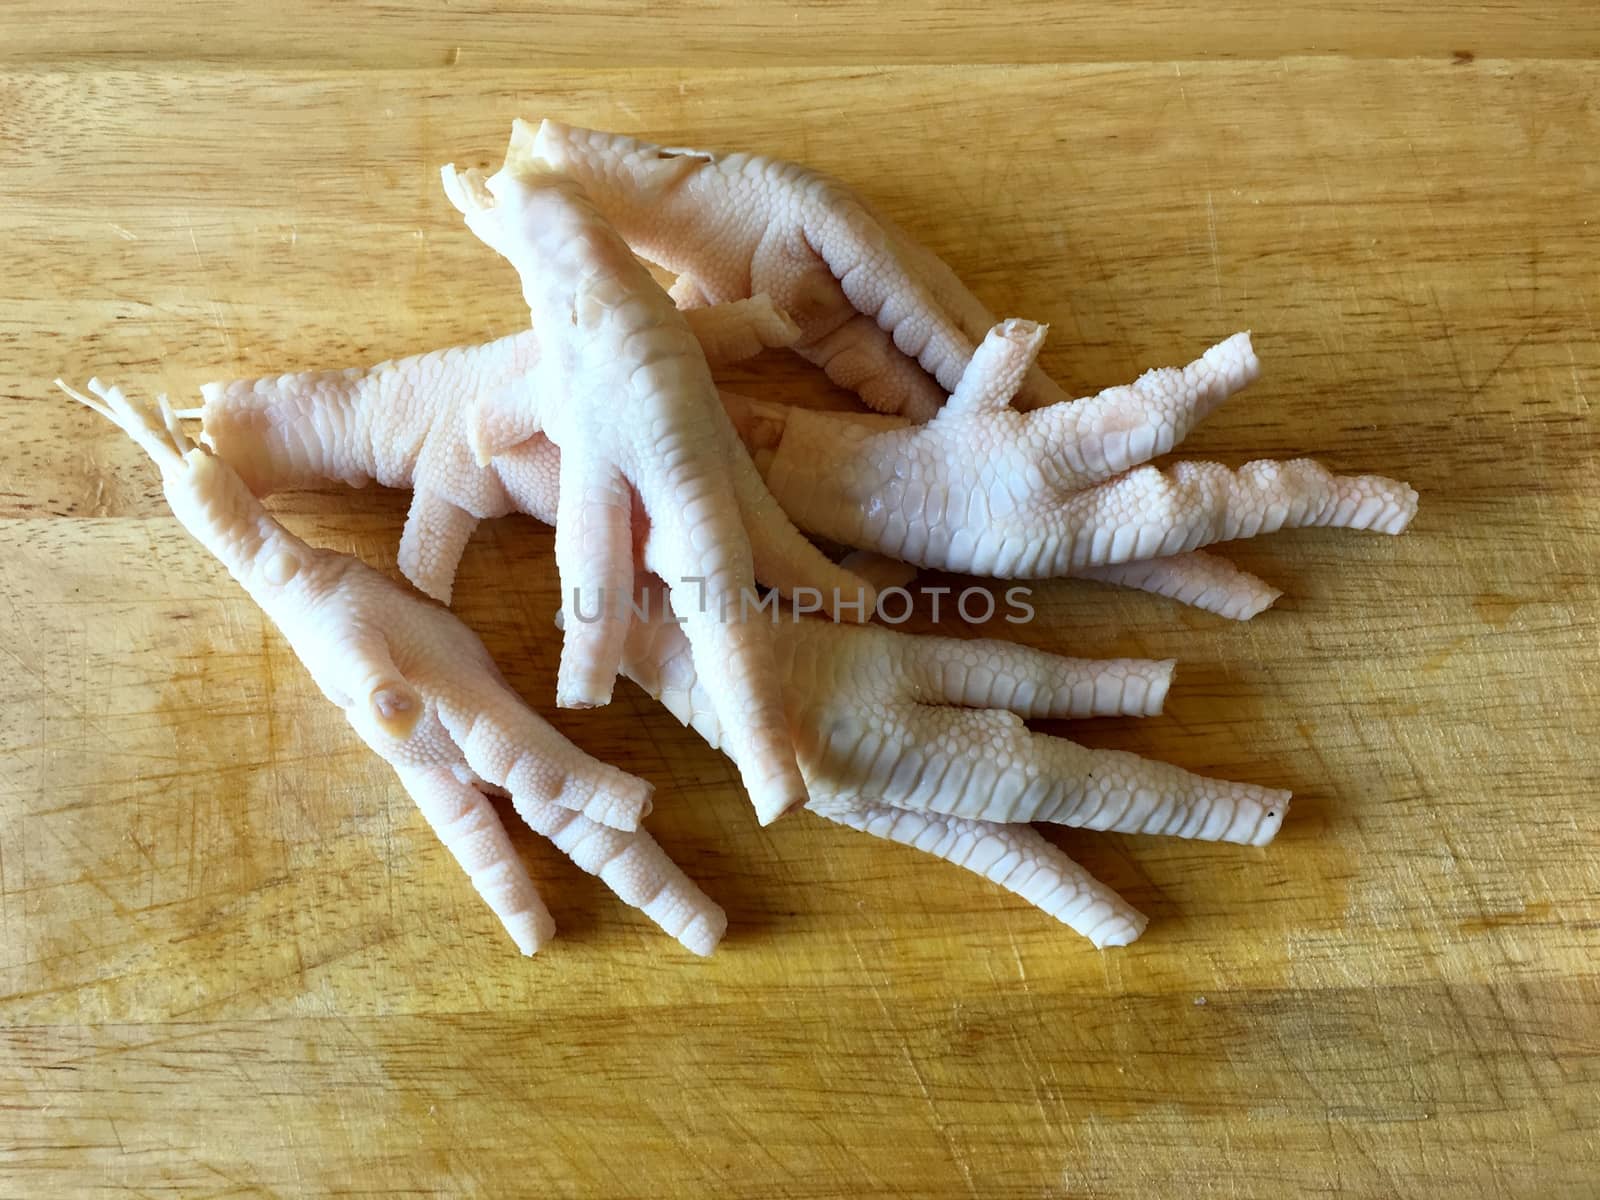 Chicken Feet without Toenails by hlehnerer